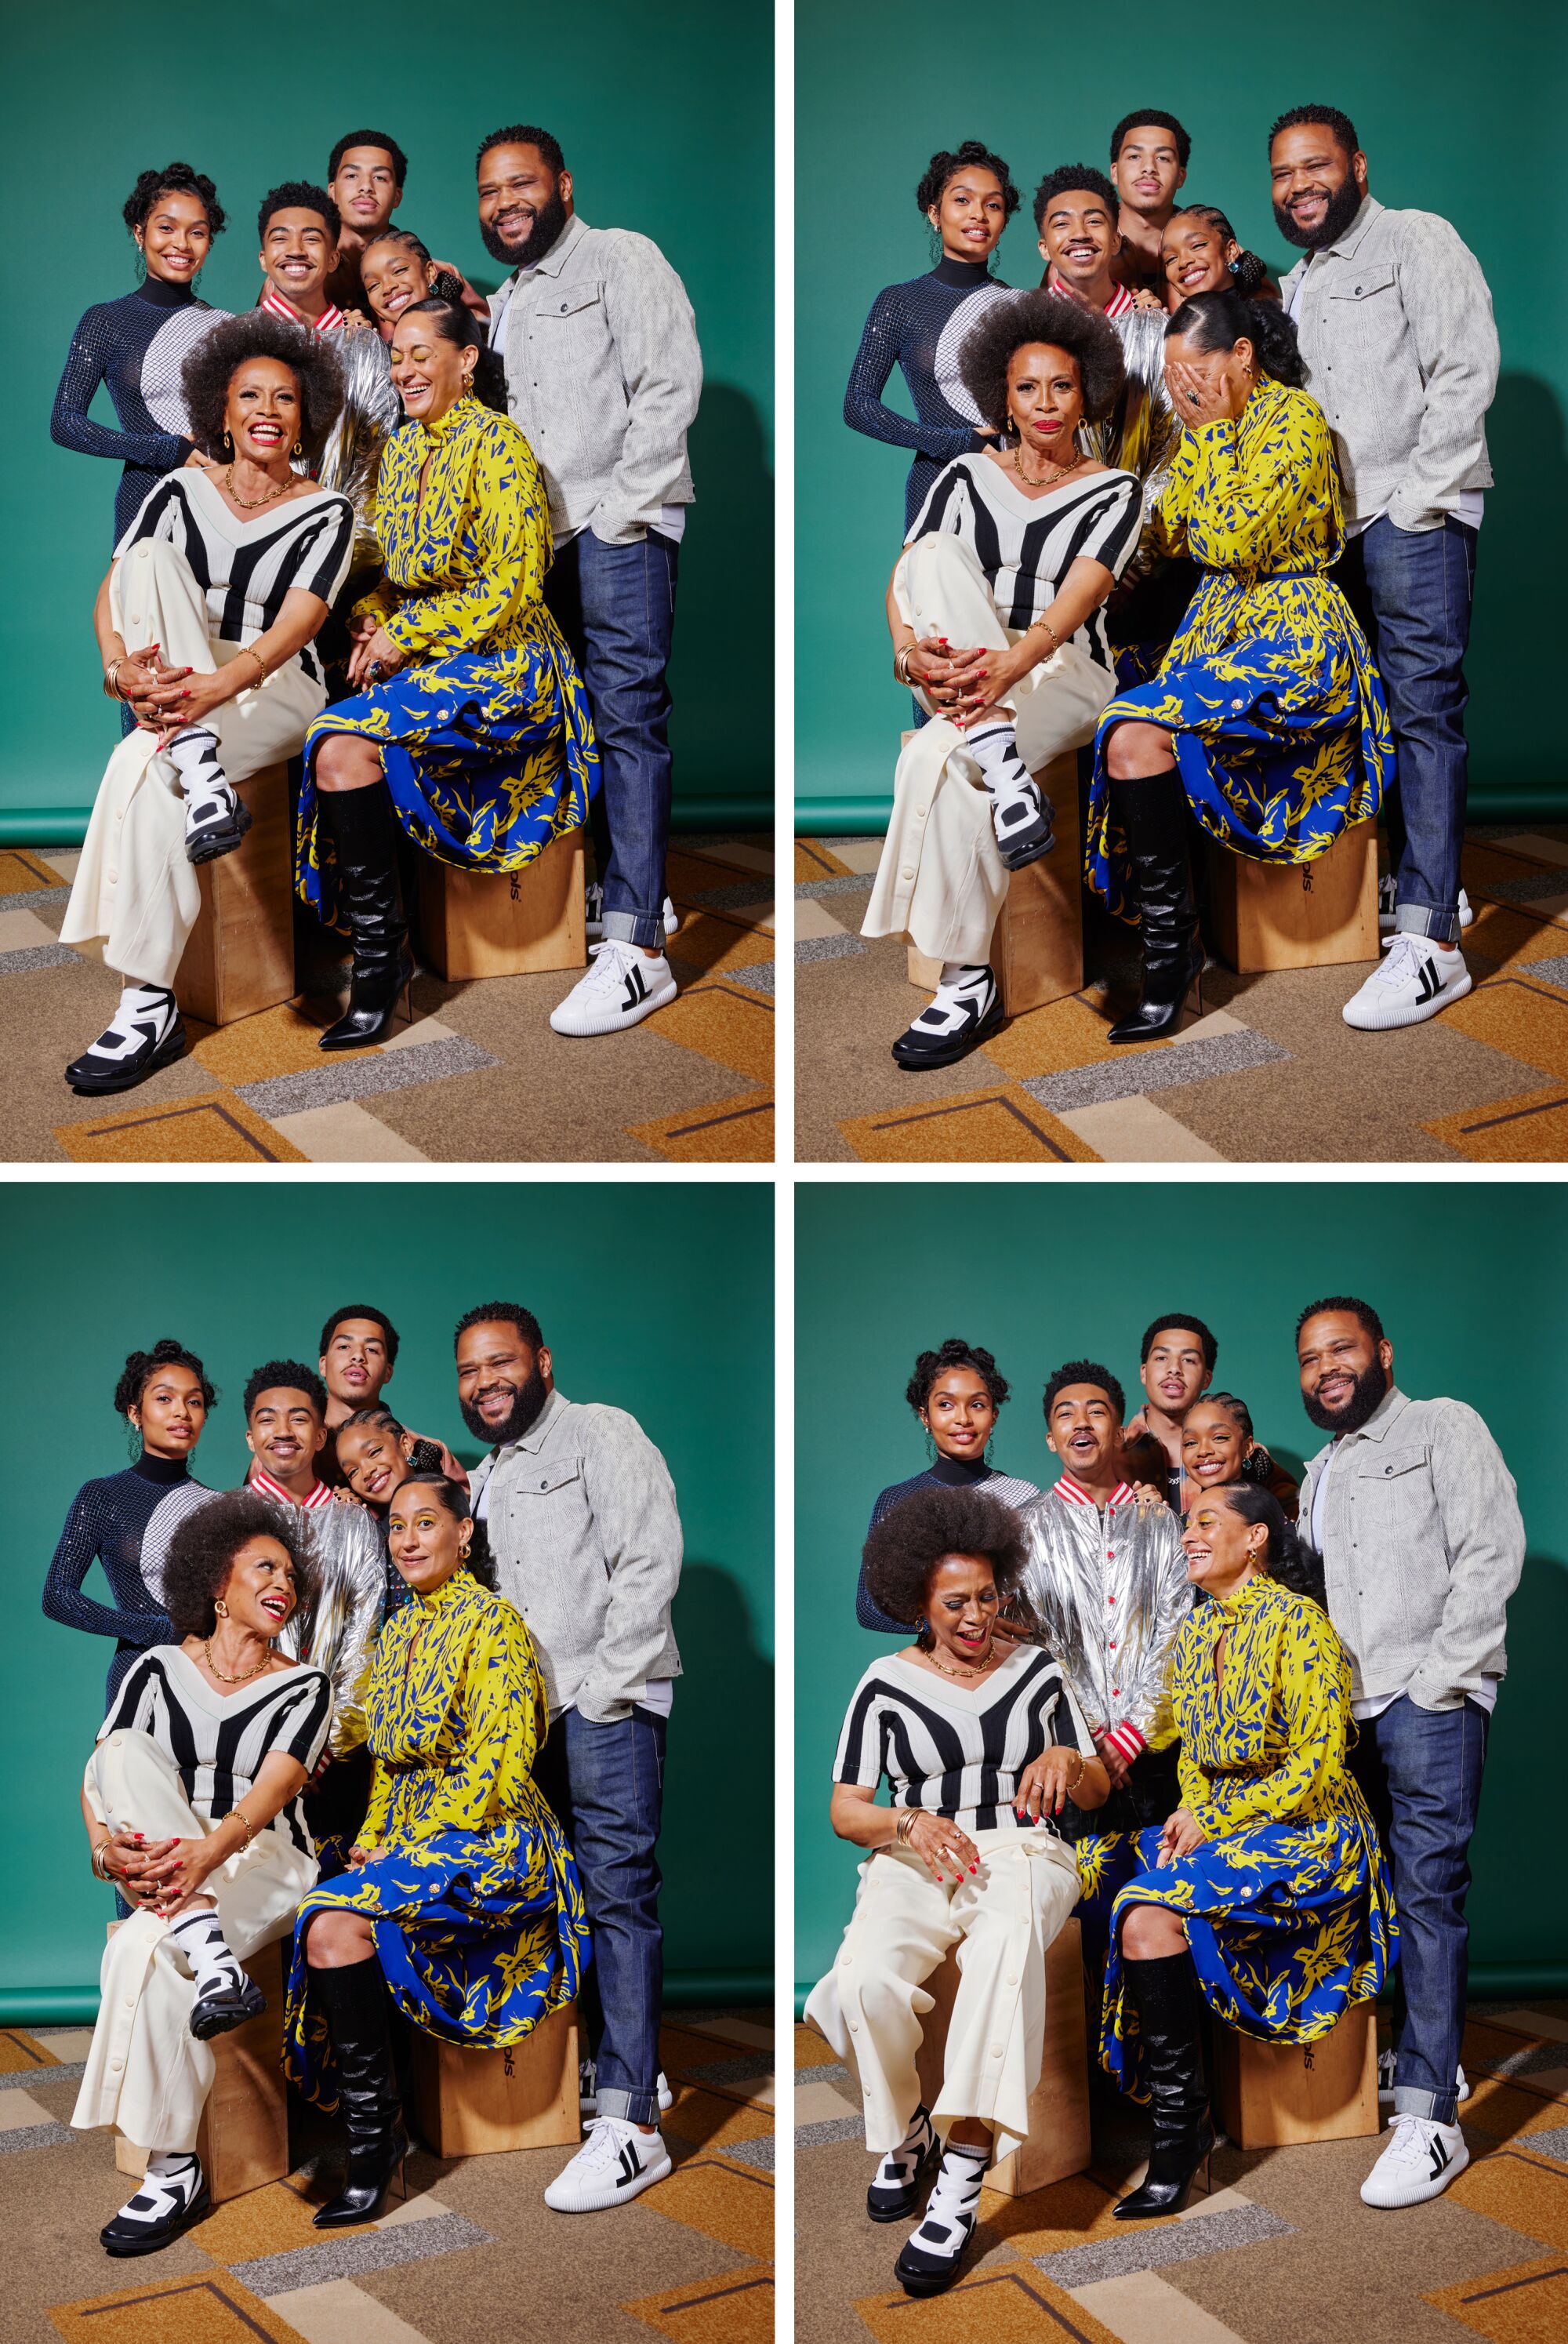 A grid of four portraits shows a group of people pose for a portrait in fancy clothing against a green backdrop.